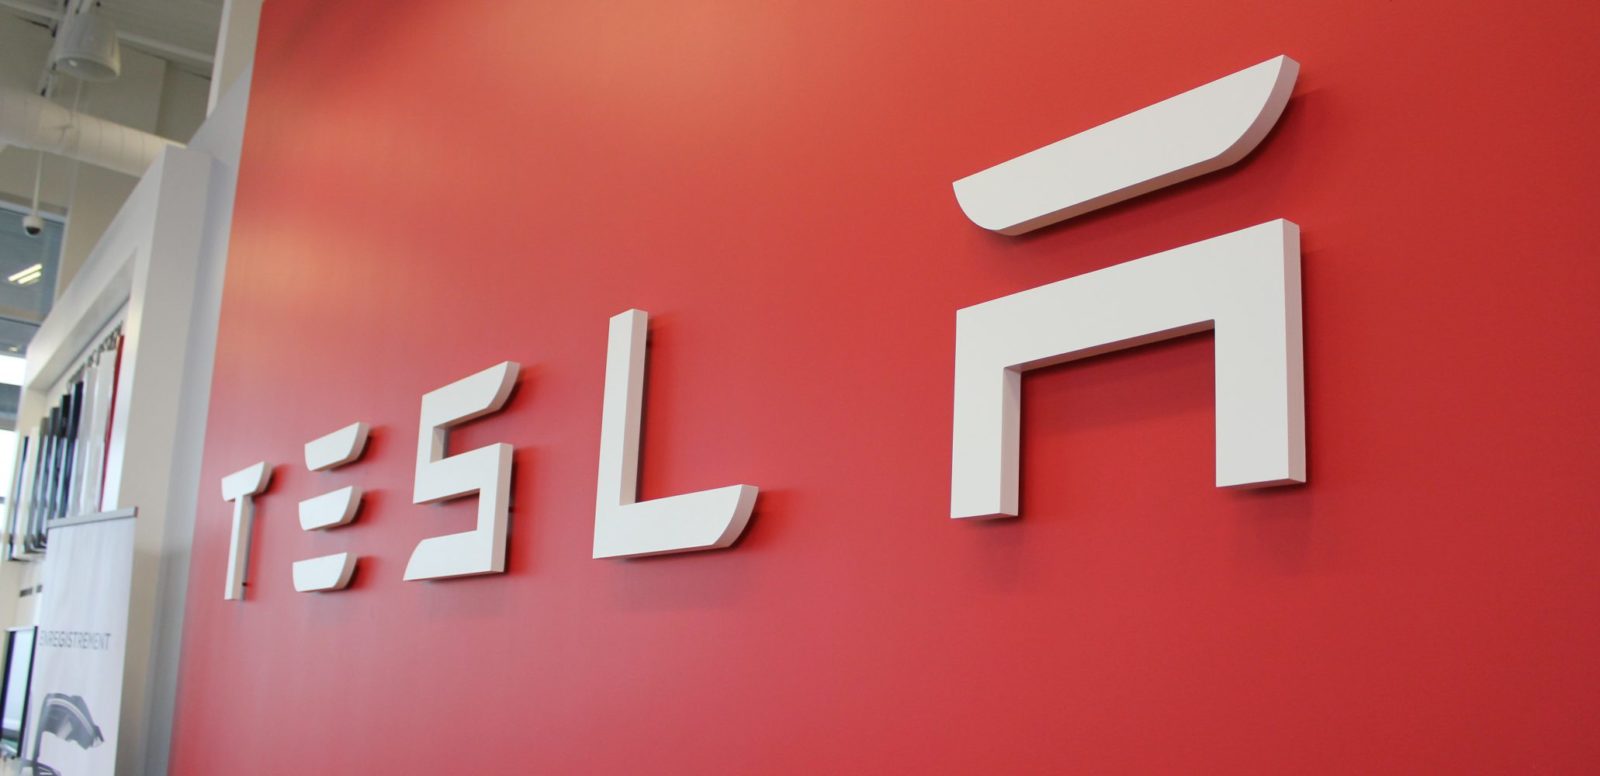 Tesla discloses that Chinese holding firm Tencent acquired a total 5% stake in the company